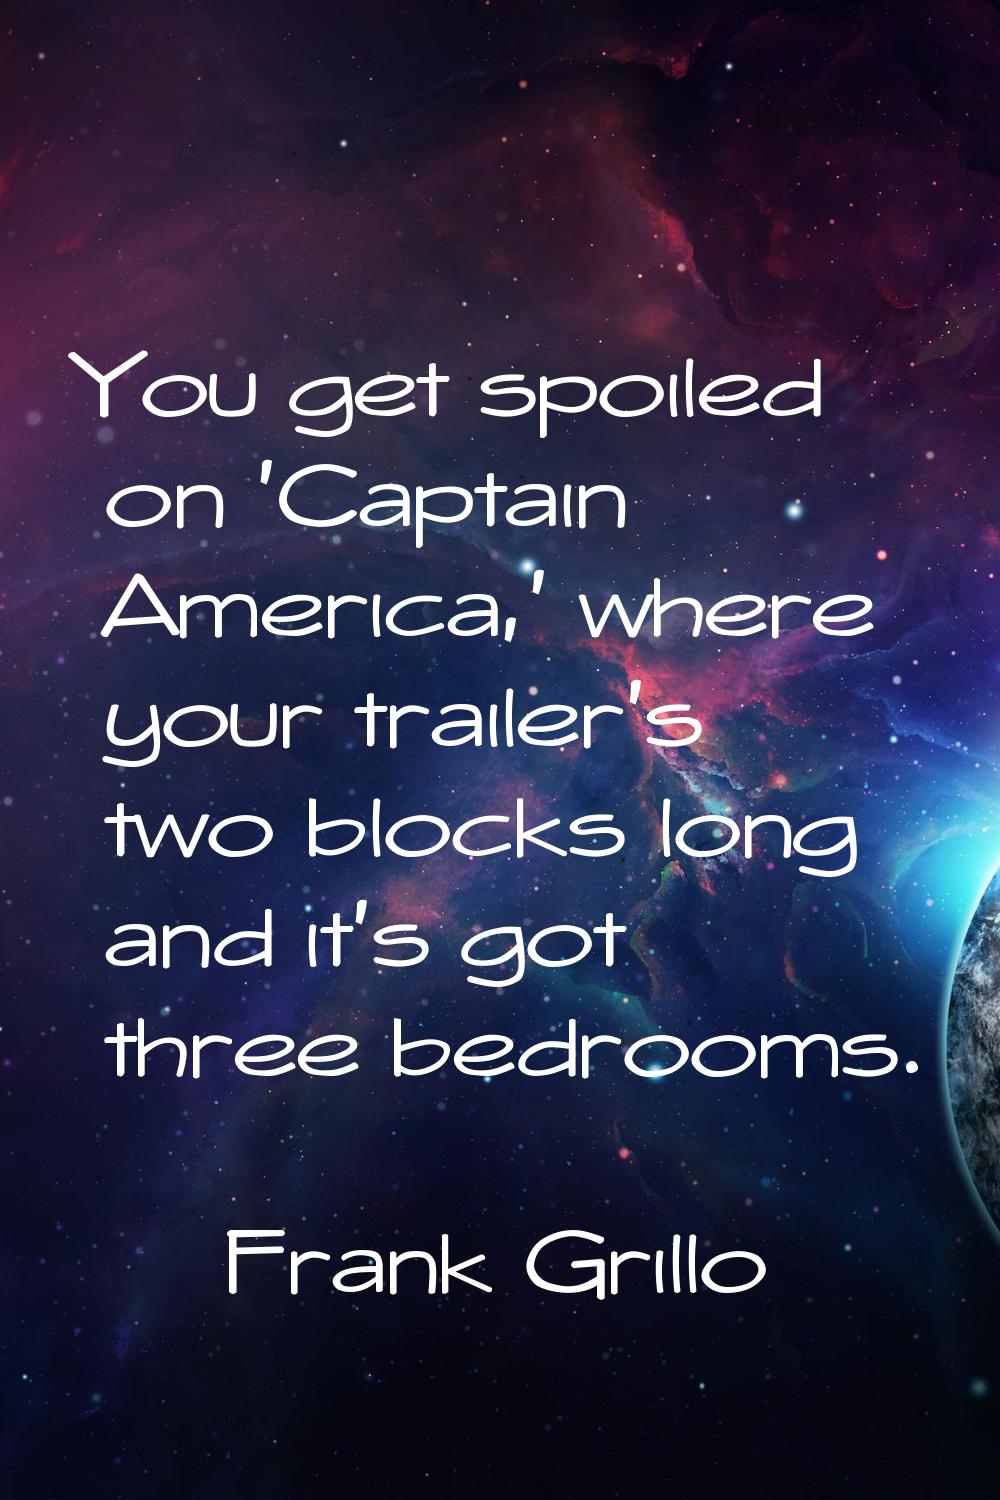 You get spoiled on 'Captain America,' where your trailer's two blocks long and it's got three bedro